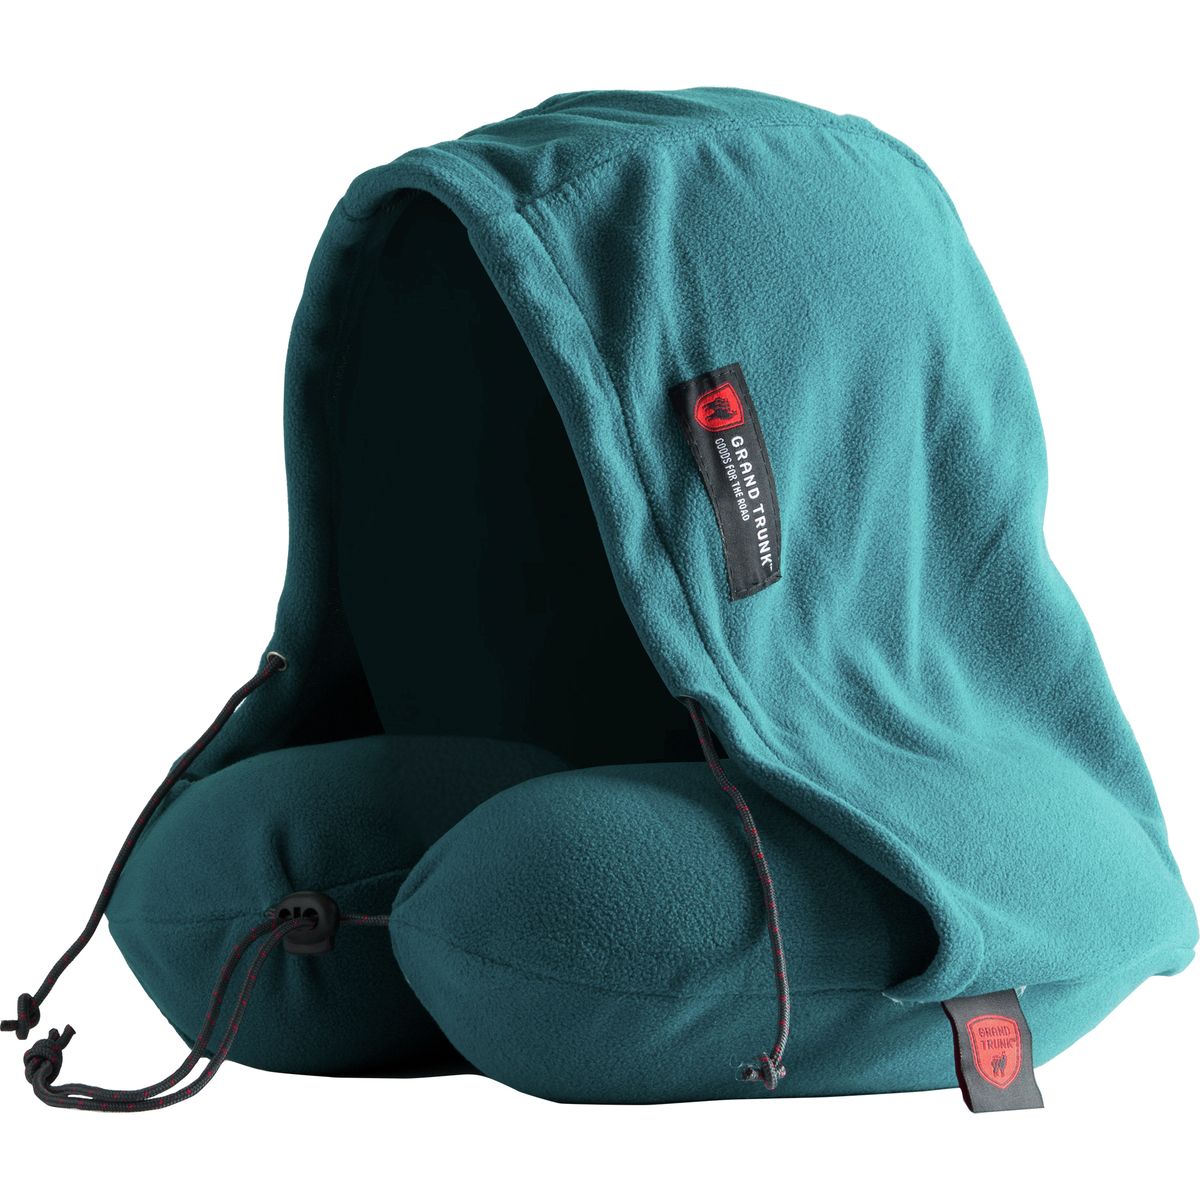 Grand Trunk Hooded Travel Pillow